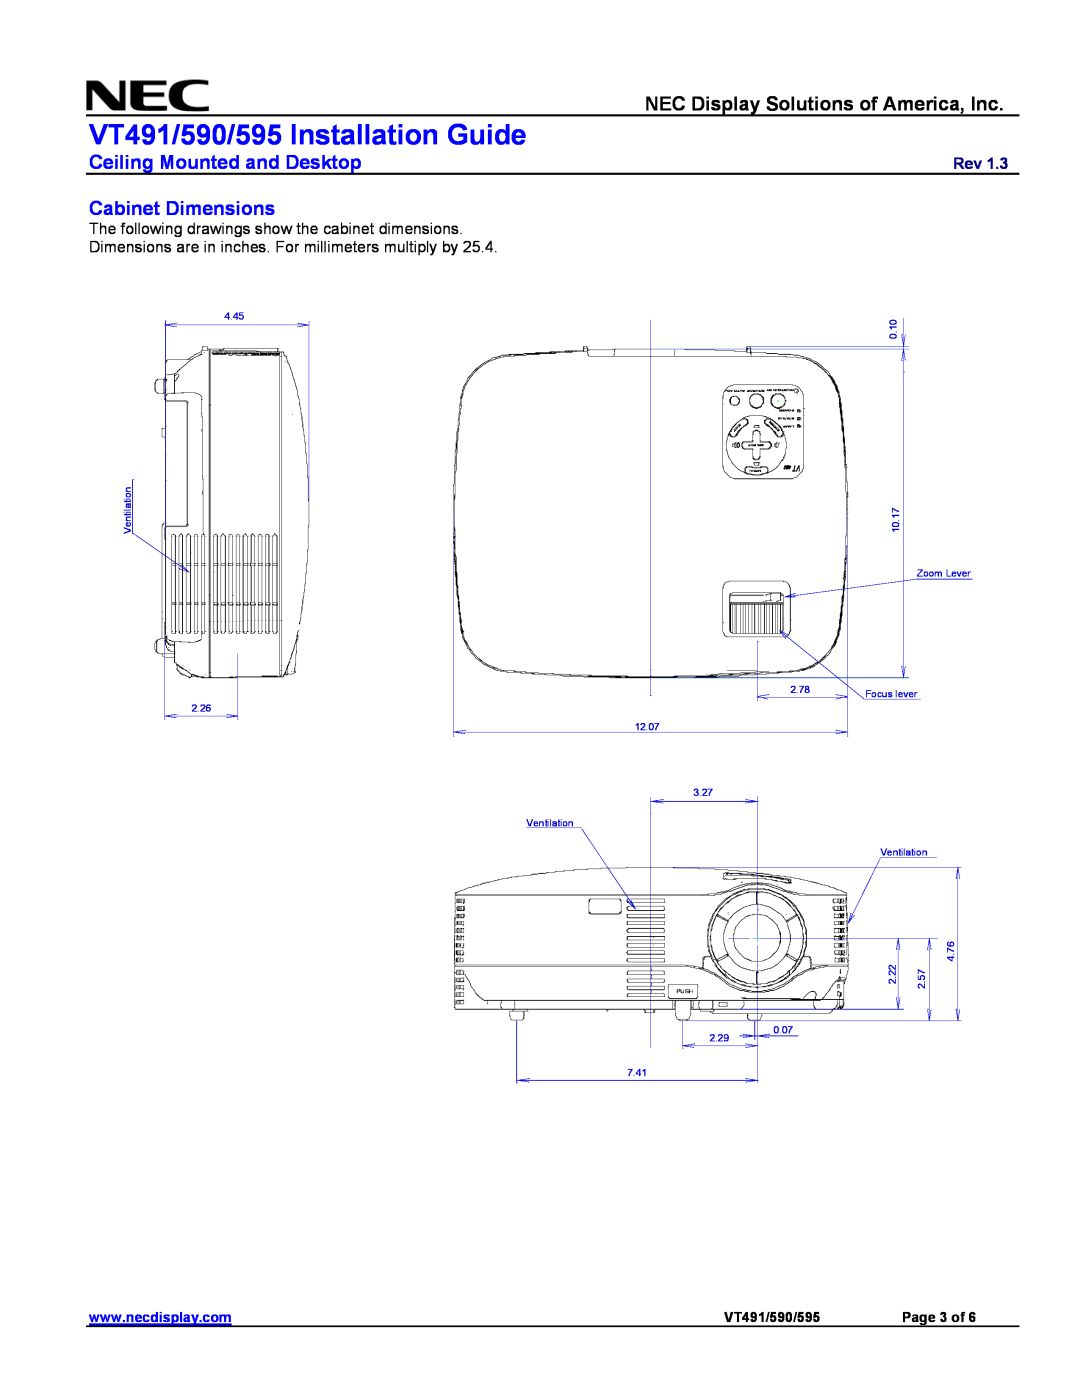 NEC Cabinet Dimensions, VT491/590/595 Installation Guide, NEC Display Solutions of America, Inc, Page 3 of, Ventilation 